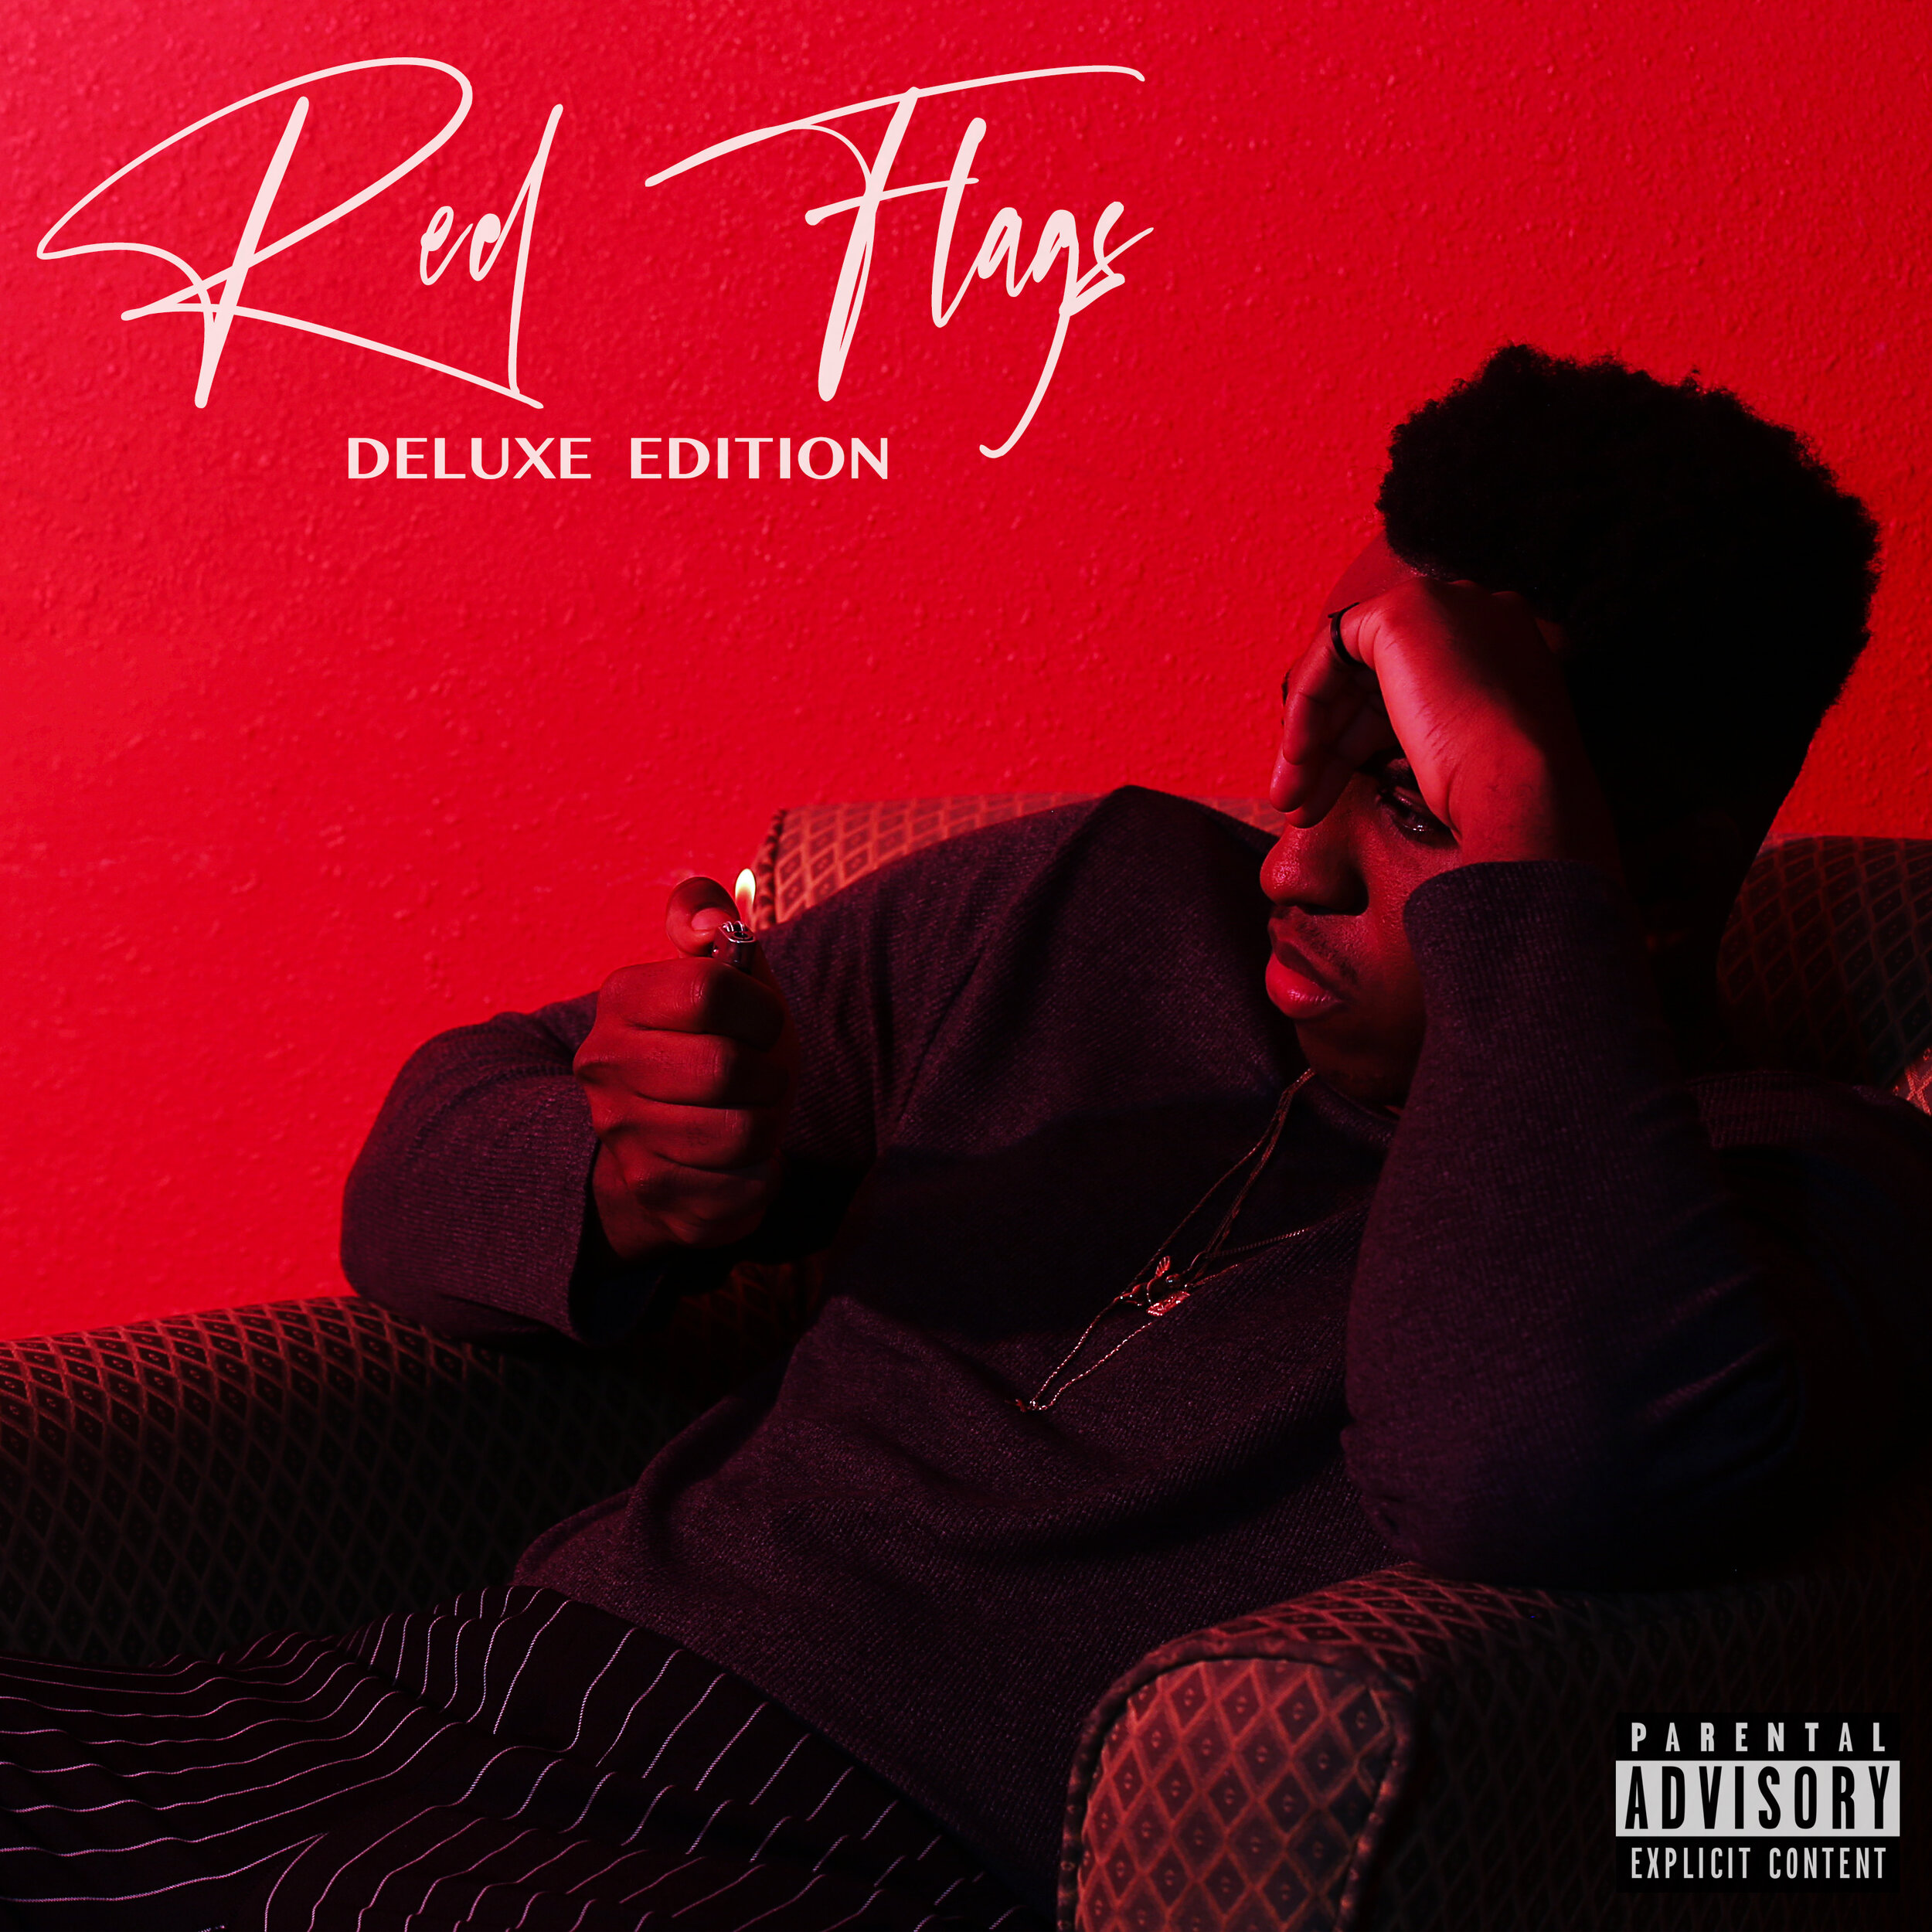 Red Flags Deluxe Cover Art.jpg